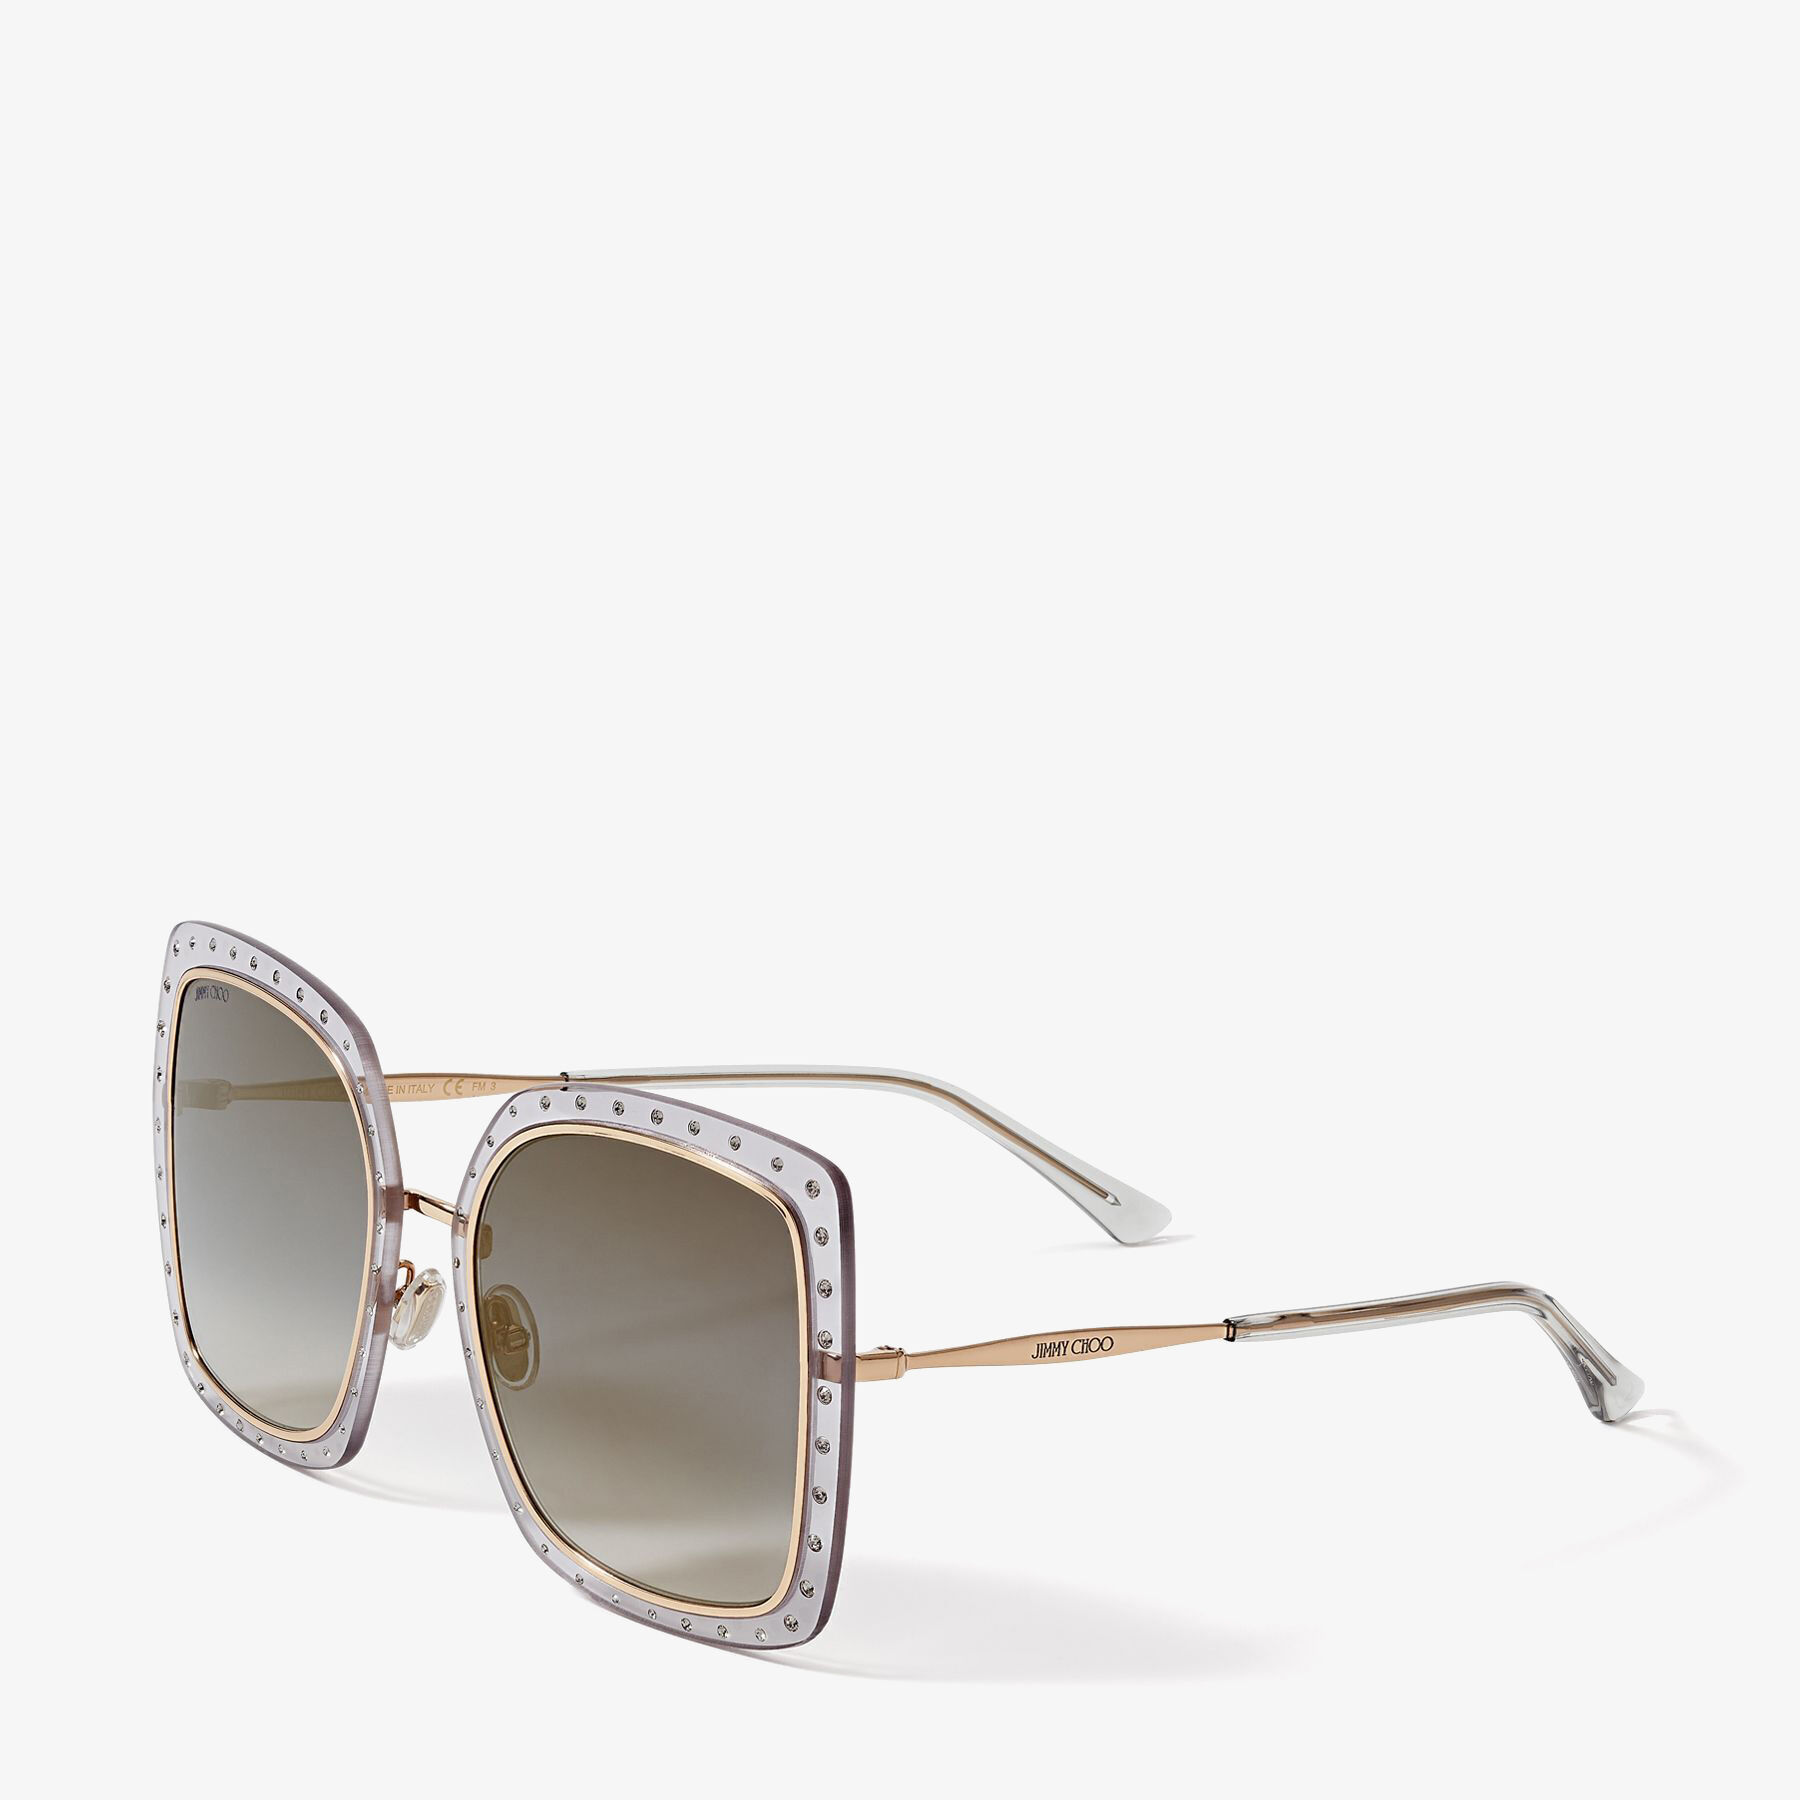 Herinnering condoom Mens Grey and Gold Square-Frame Sunglasses with Swarovski Crystal Embellishment  | DANY | Spring Summer 2021 | JIMMY CHOO